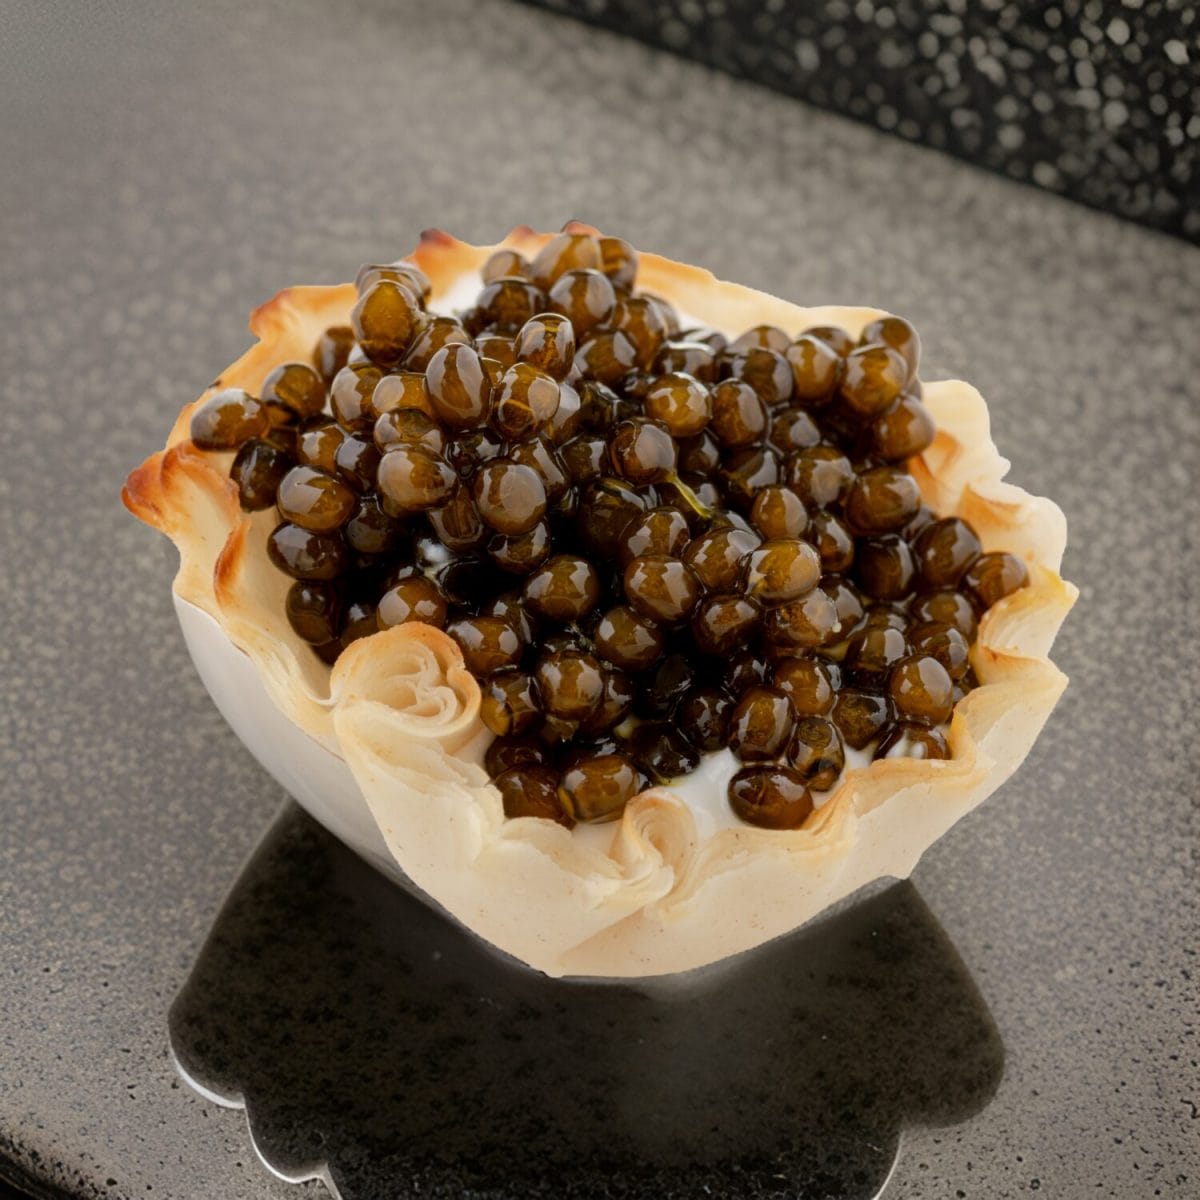 Toronto Lifestyle Food Photographer for Horderve and Caviar using AI & CGI after